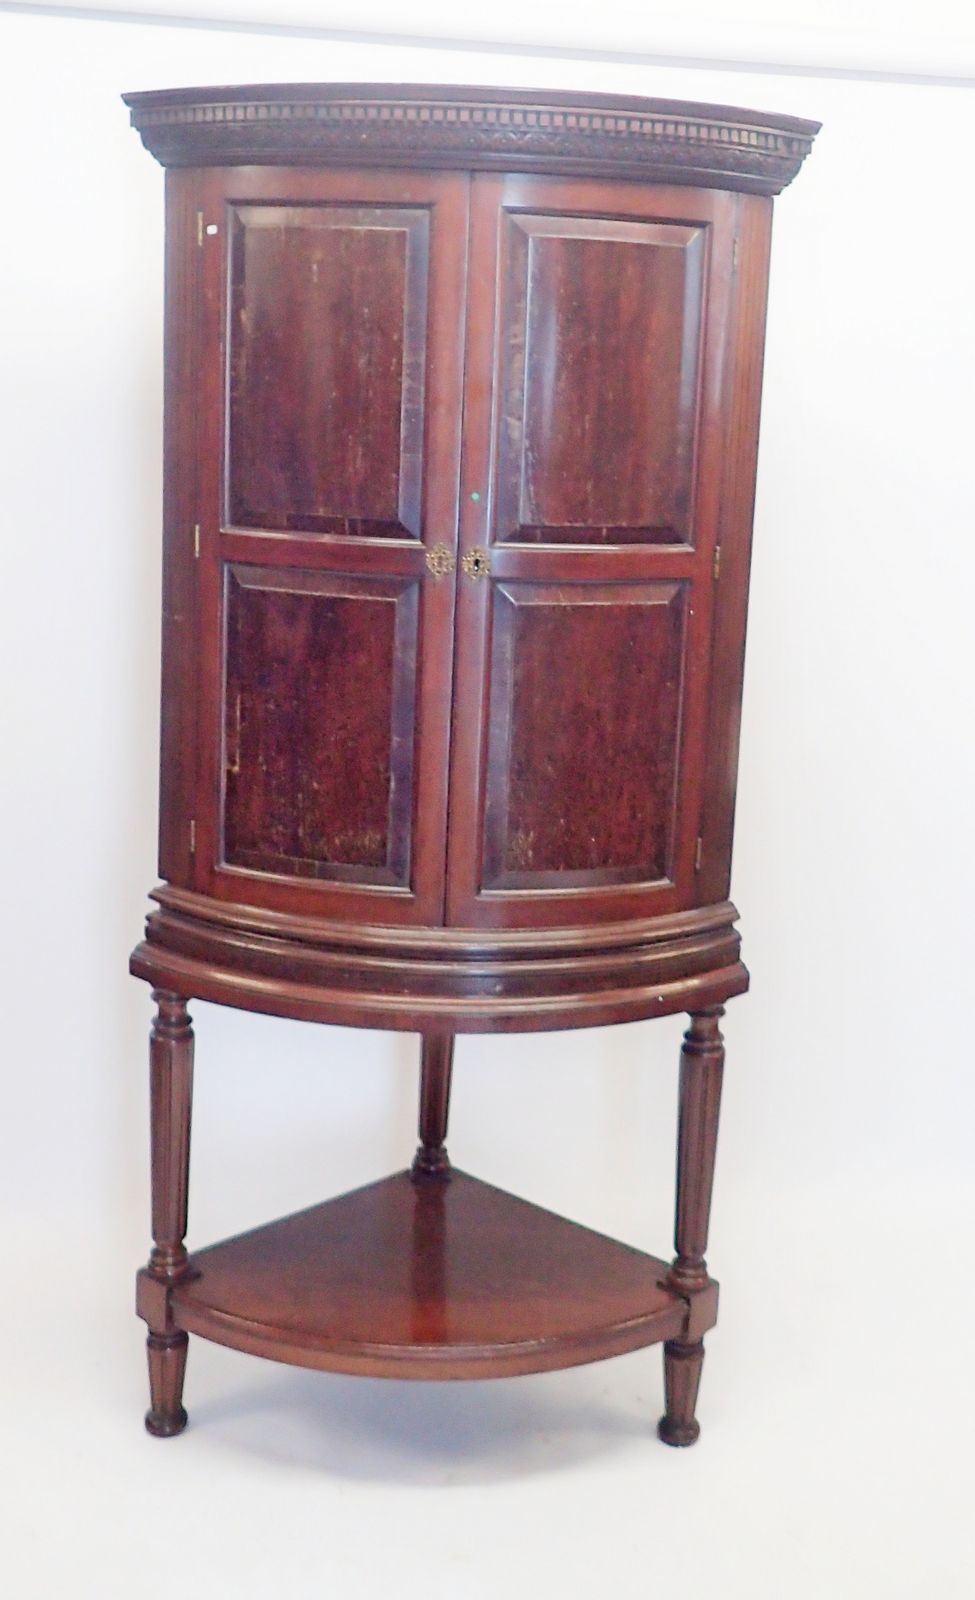 A 19th century bow fronted mahogany corner cabinet with unusual hinged secret compartment to